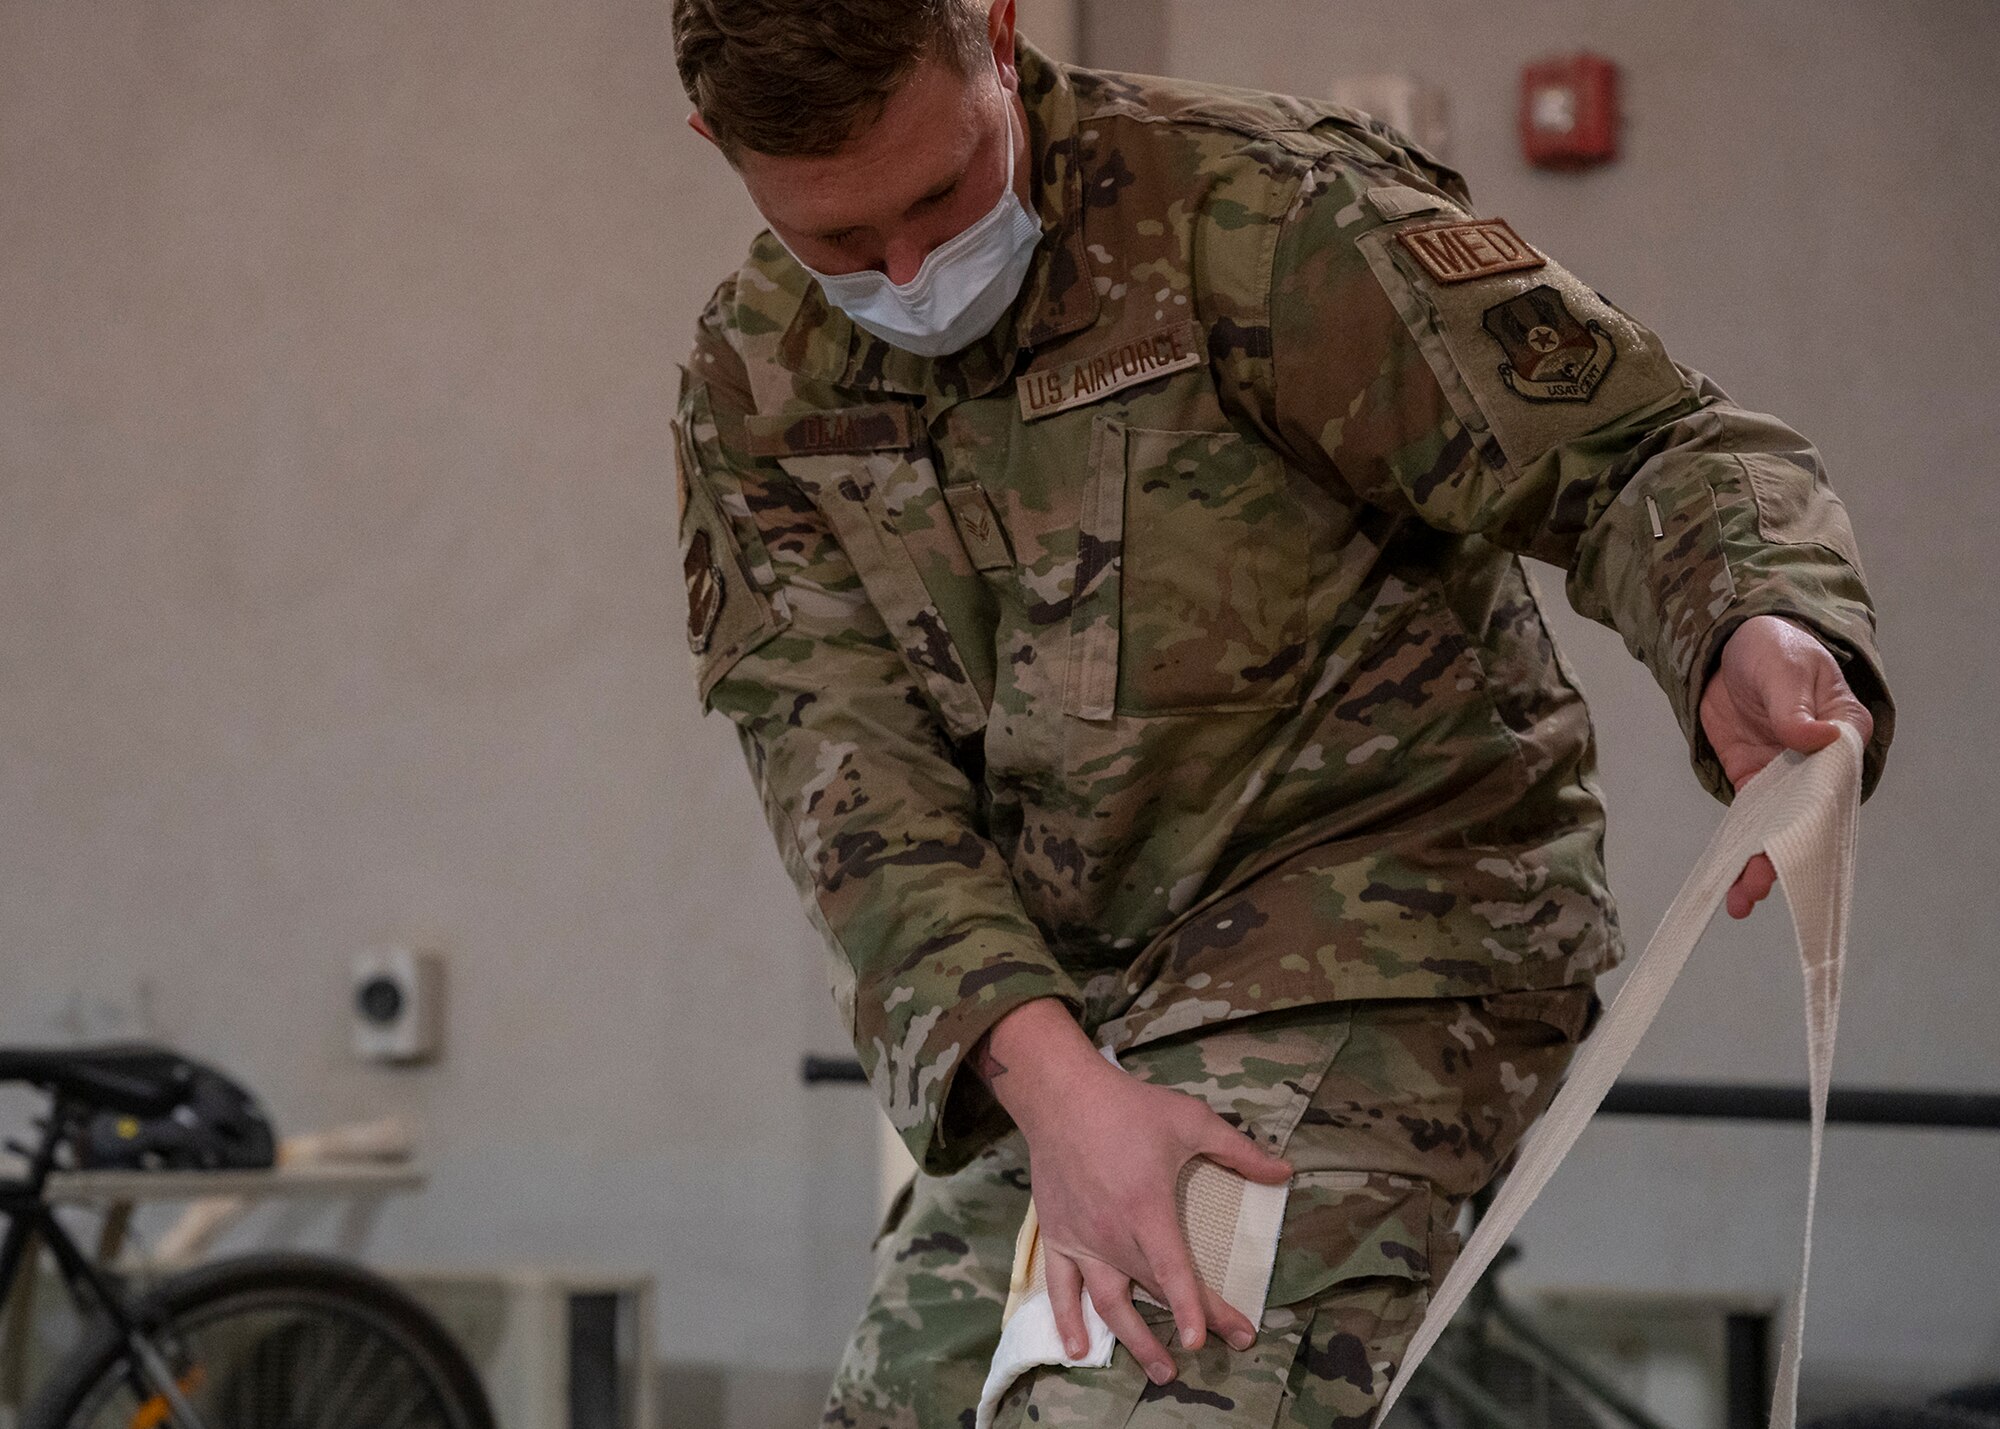 U.S. Air Force Senior Airman Kevin Dean, 380th Expeditionary Medical Group (EMDG) technician, demonstrates self-aid buddy care during a 380th EMDG immersion event at Al Dhafra Air Base, United Arab Emirates, Jan. 28, 2021.